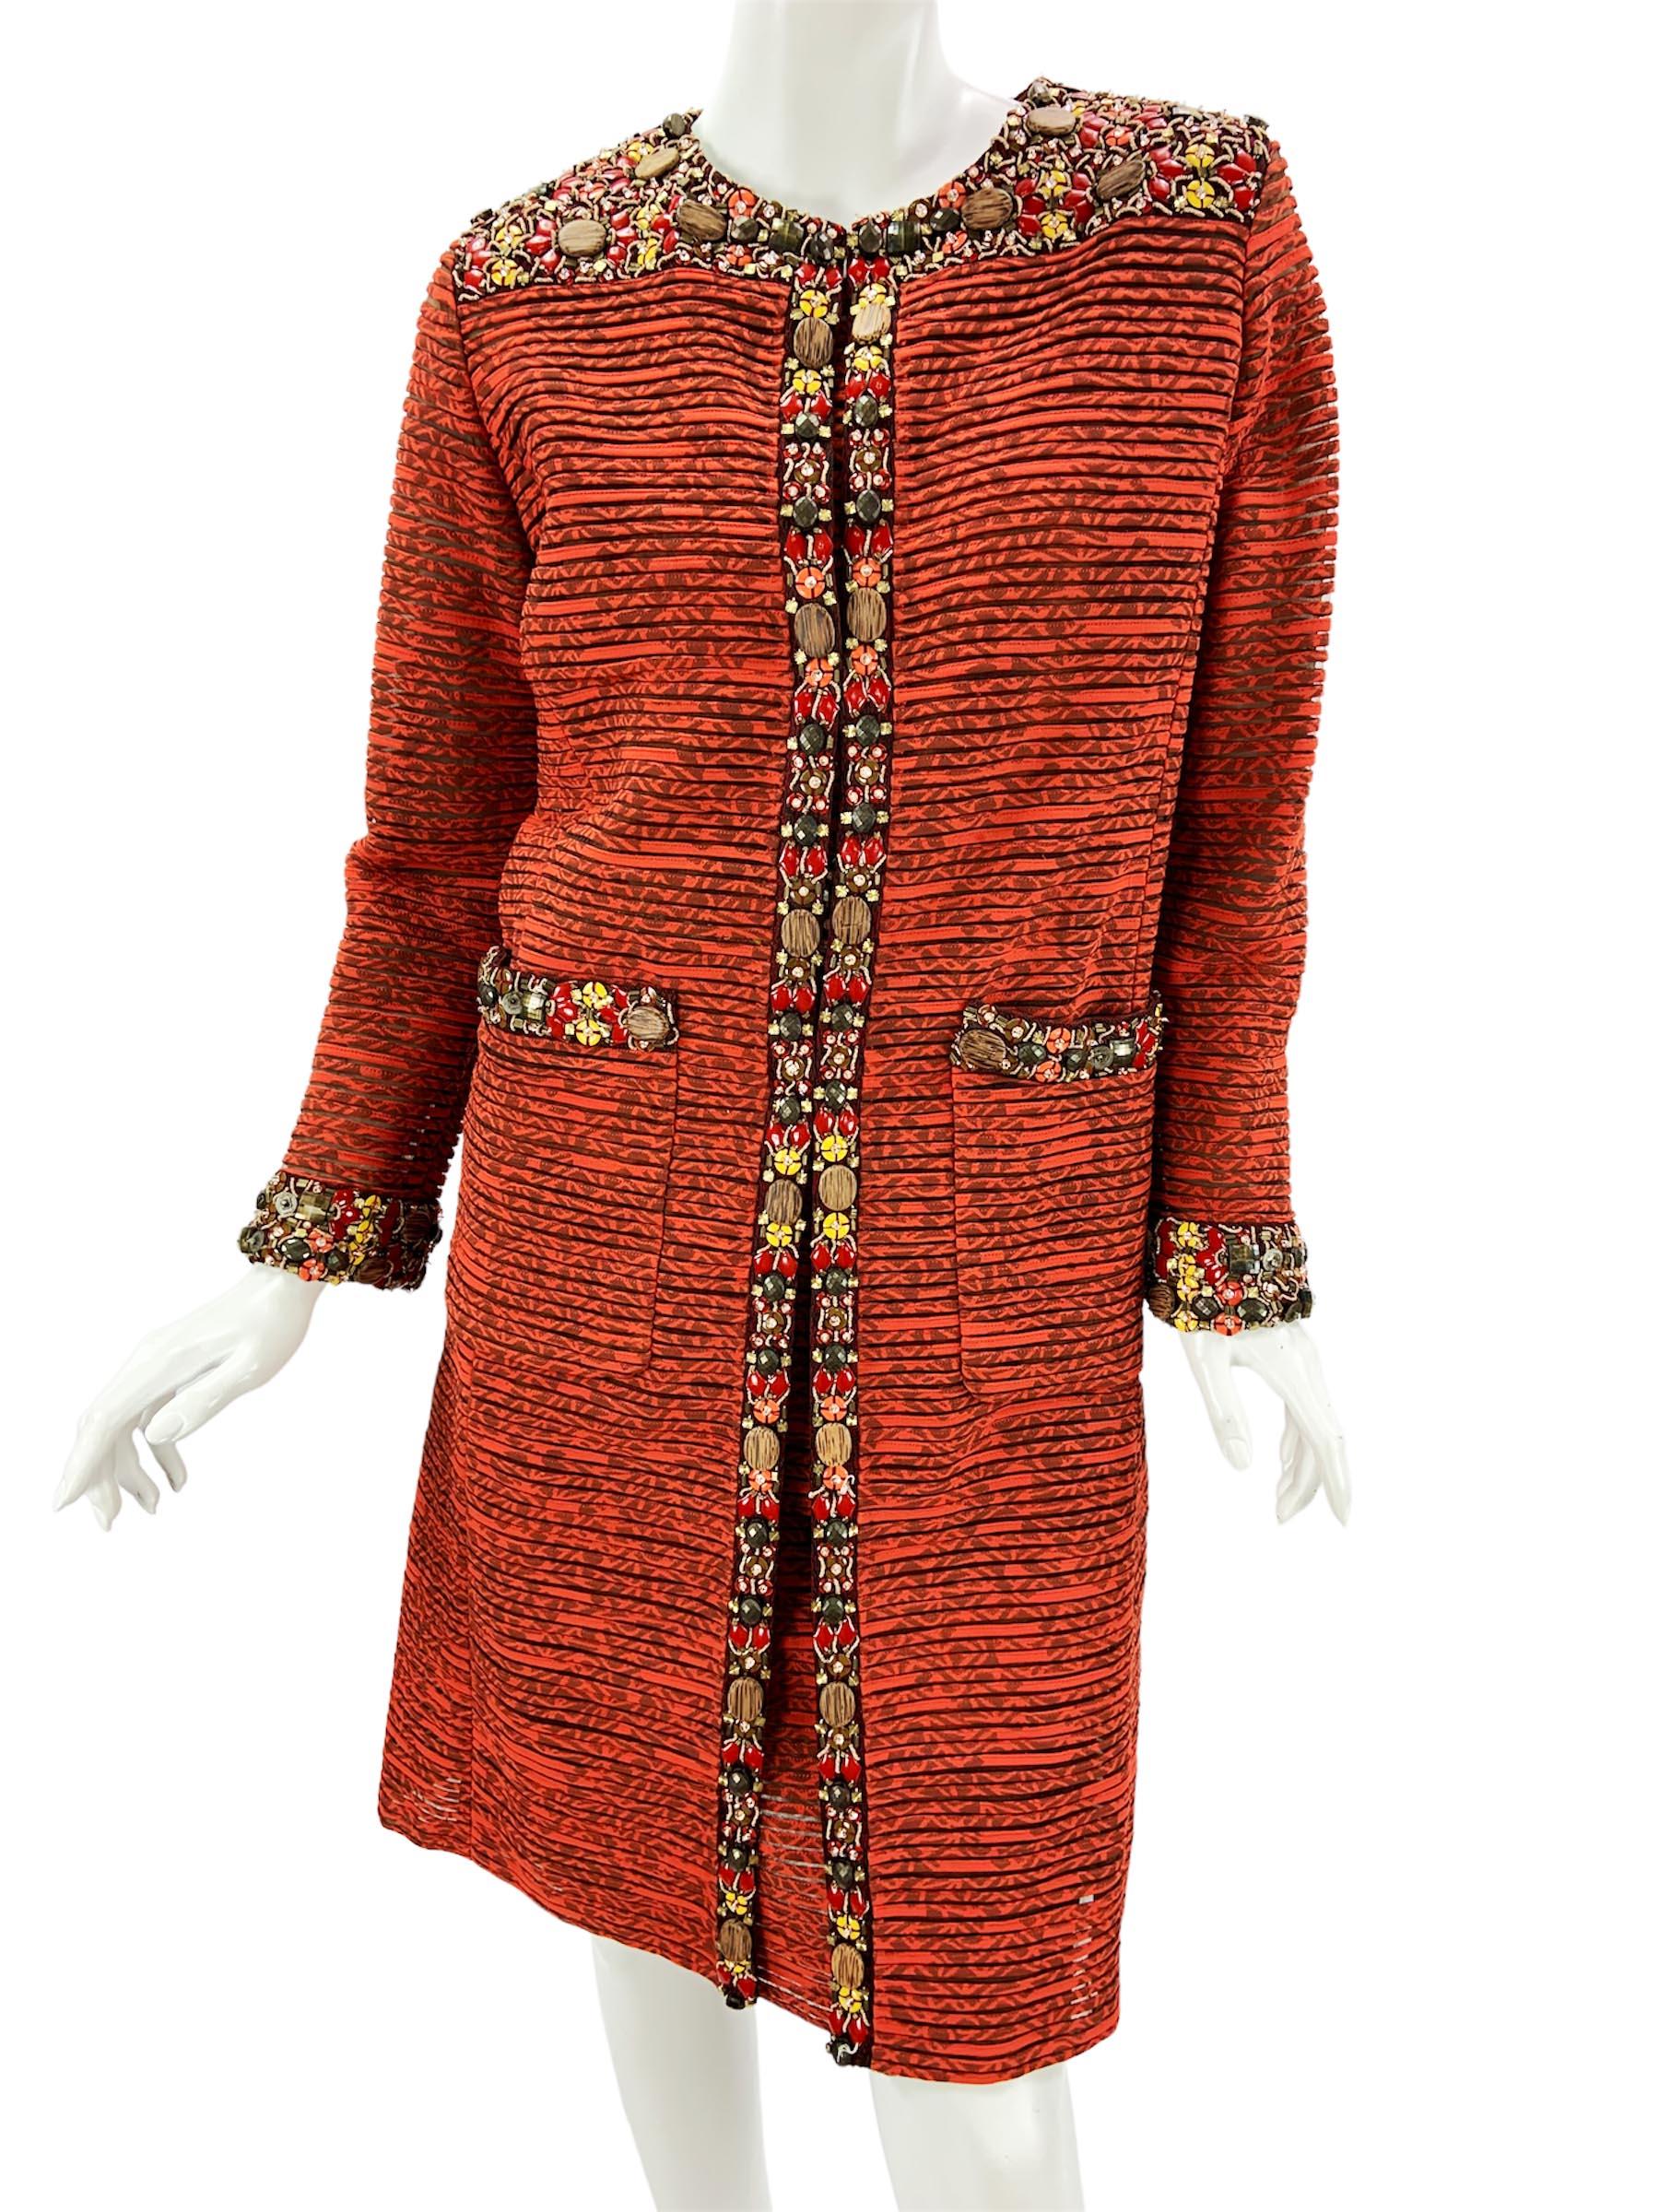 Oscar de la Renta 2009 Collection Silk Brick Red Embellished Coat + Dress US 6 4 In New Condition For Sale In Montgomery, TX